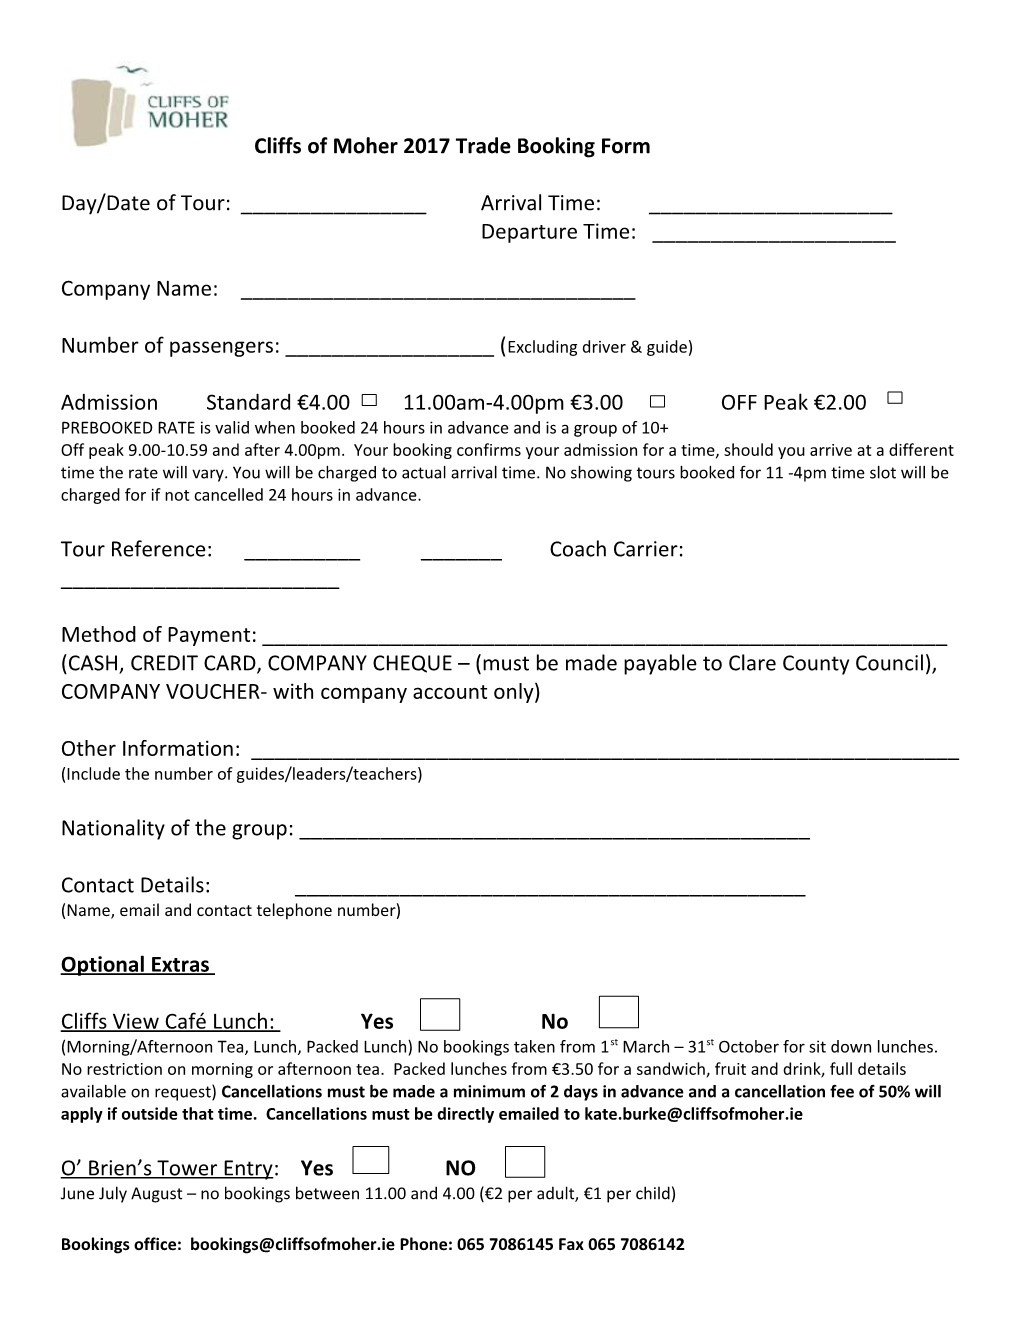 Cliffs of Moher Visitor Experience Booking Form